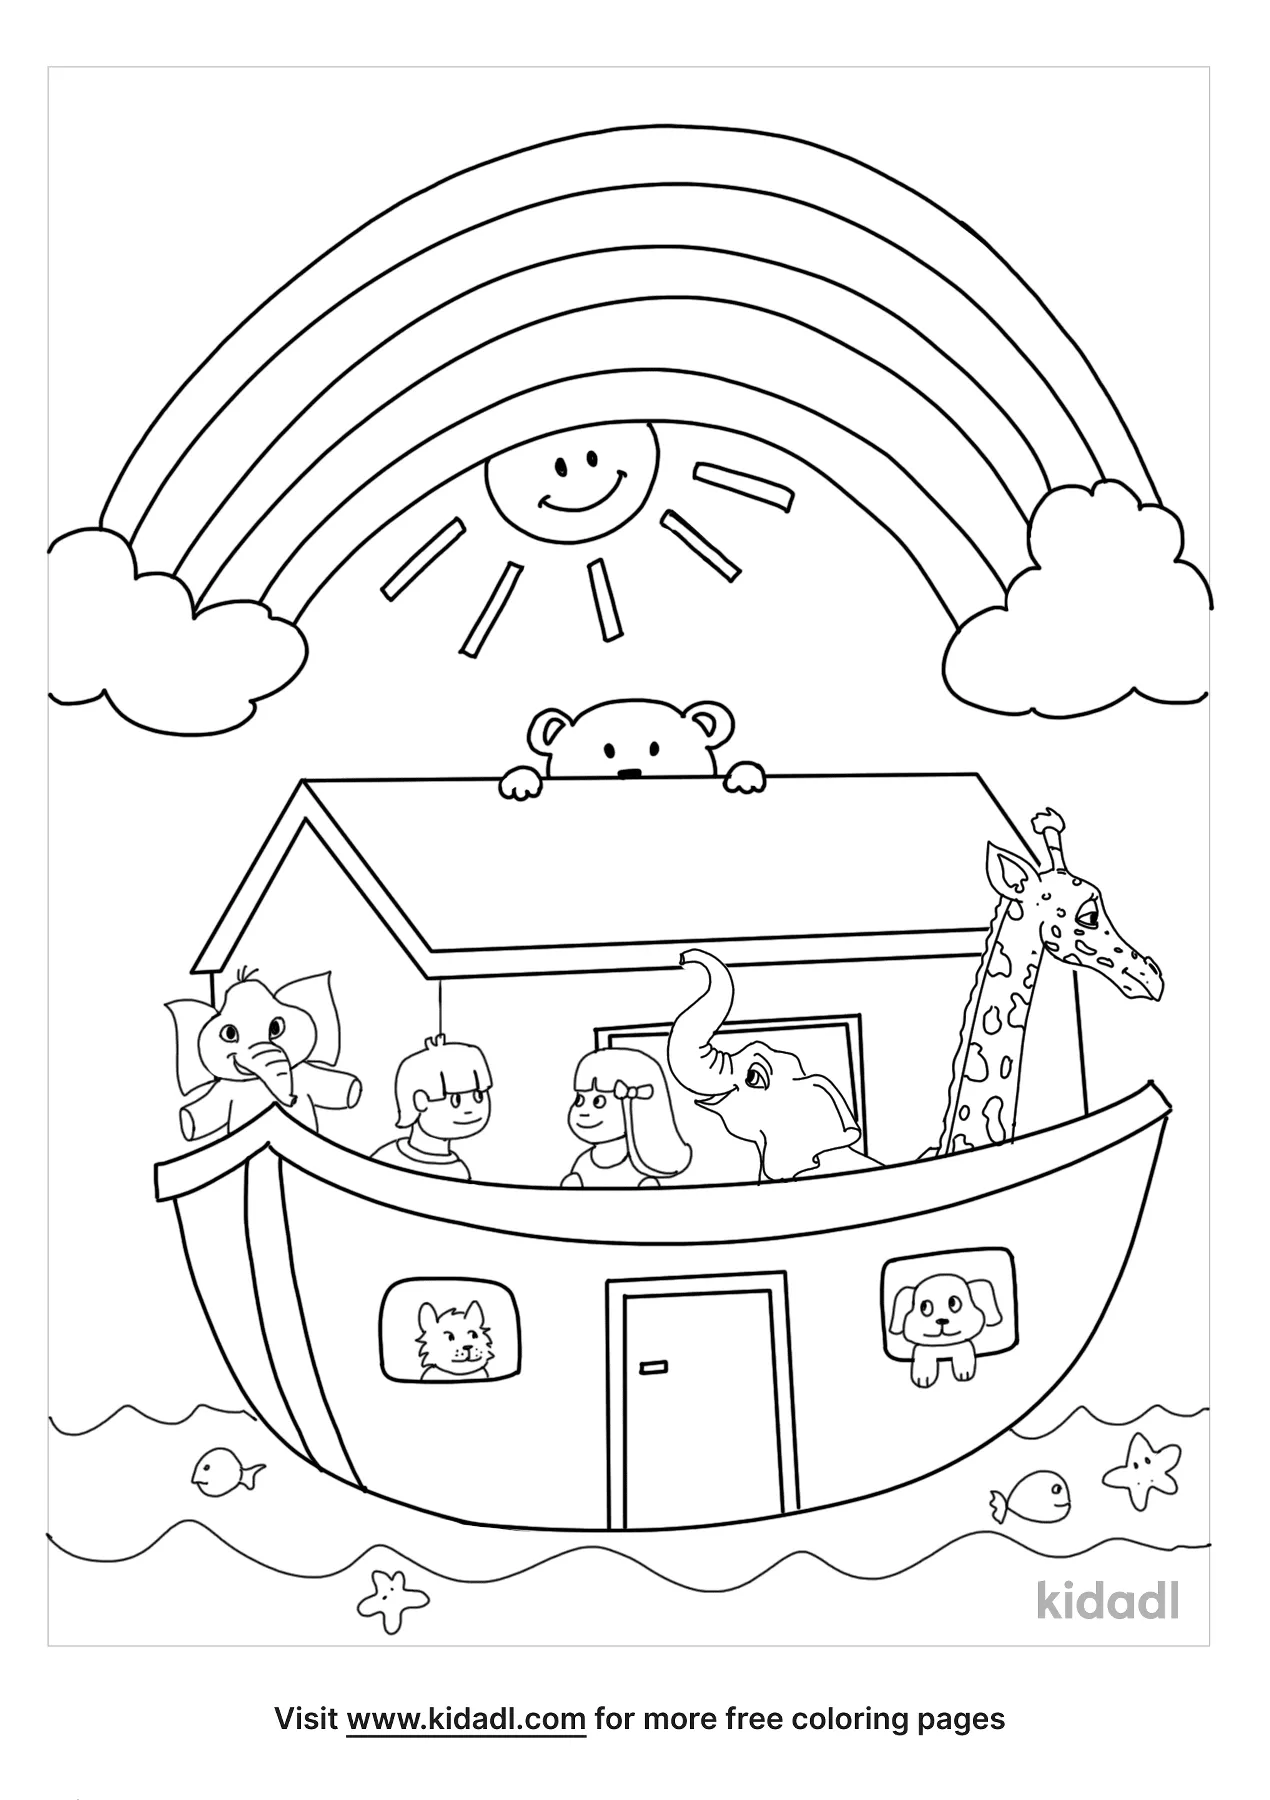 Noah S Ark Coloring Pages Free Bible Coloring Pages Kidadl